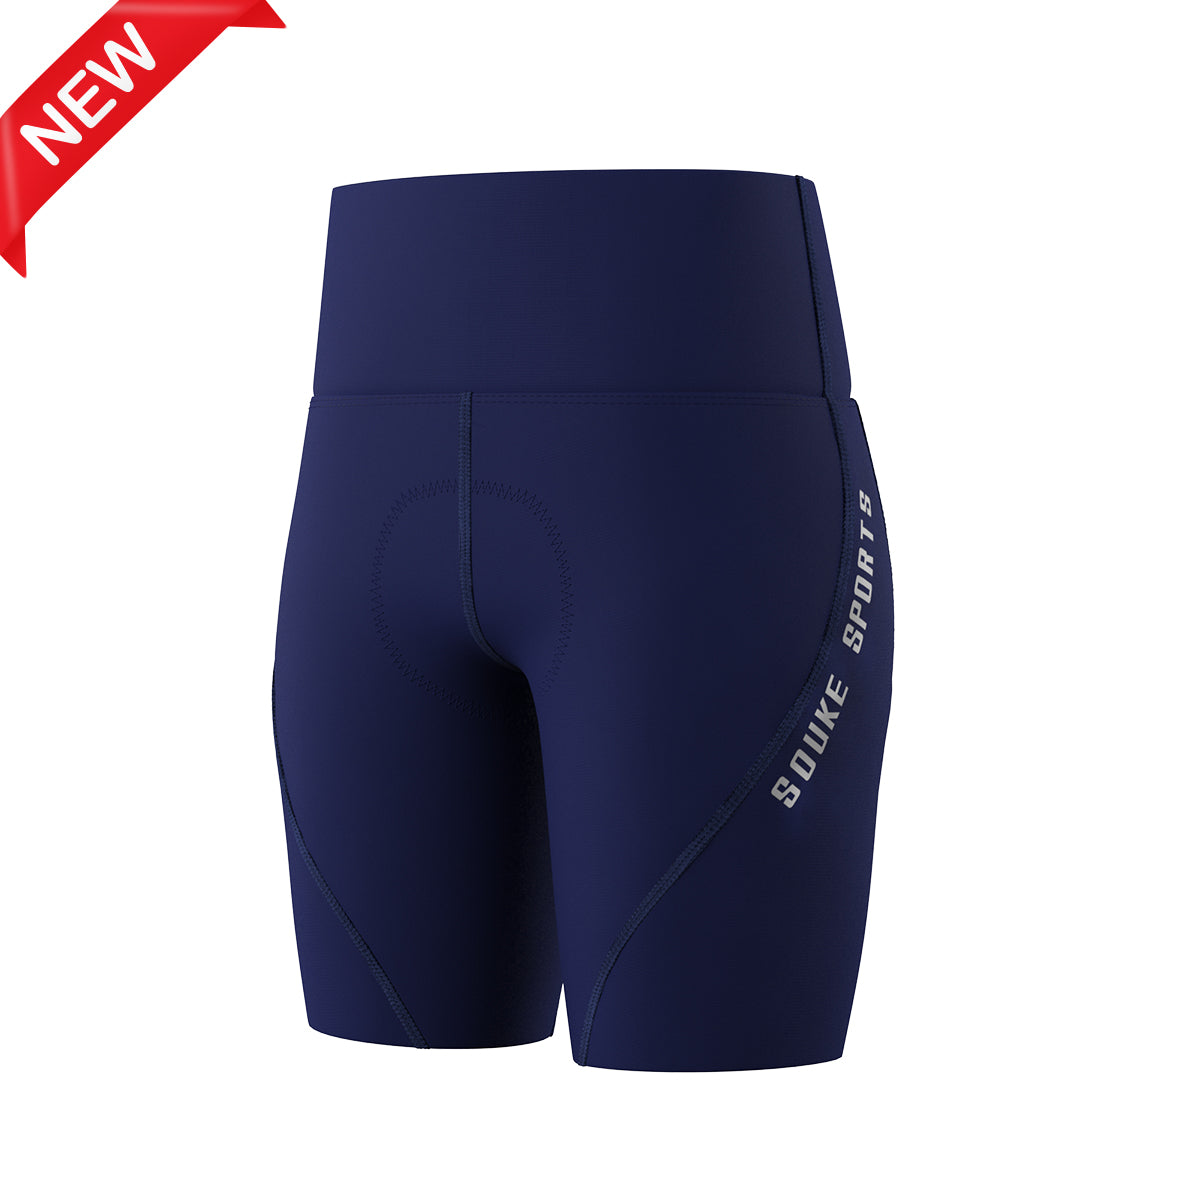 Souke Sports New Women's Classic Cycling Padded/Non padded Shorts PS0723--Navy Blue